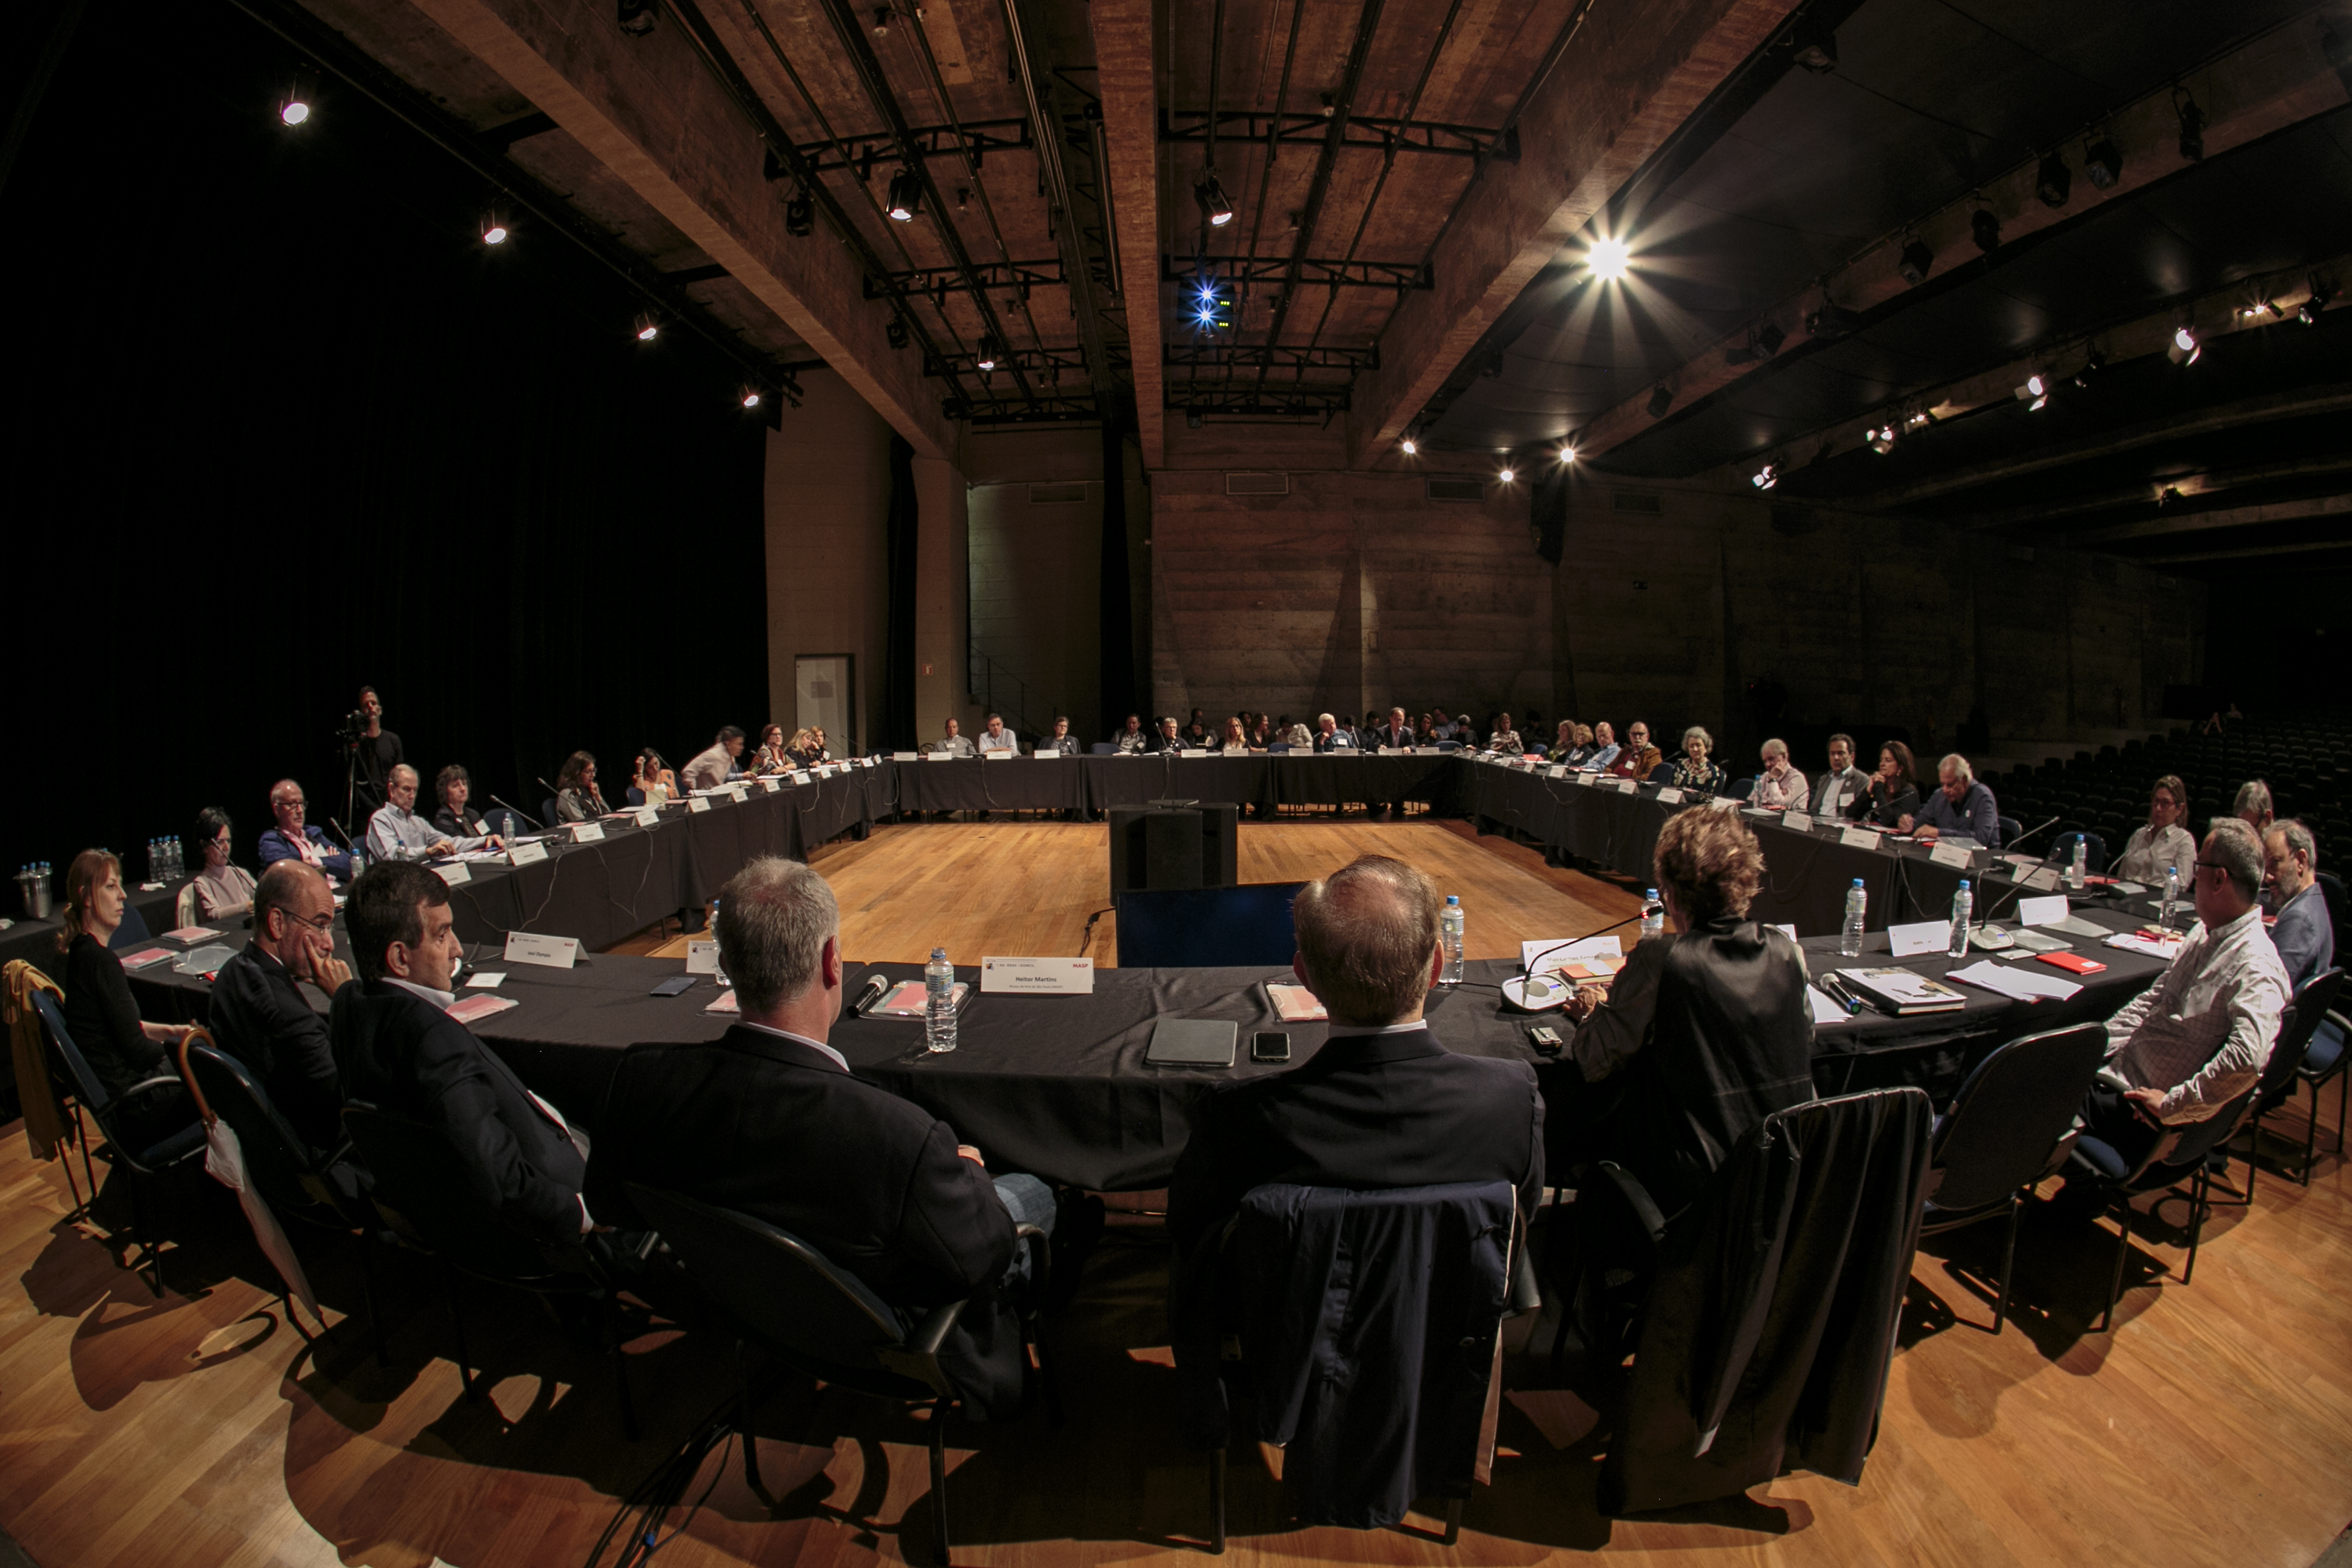 <p><b>The 2020 Ideas Council Conference in Buenos Aires, Argentina</b></p>

<p>Postponed until further notice</p>
